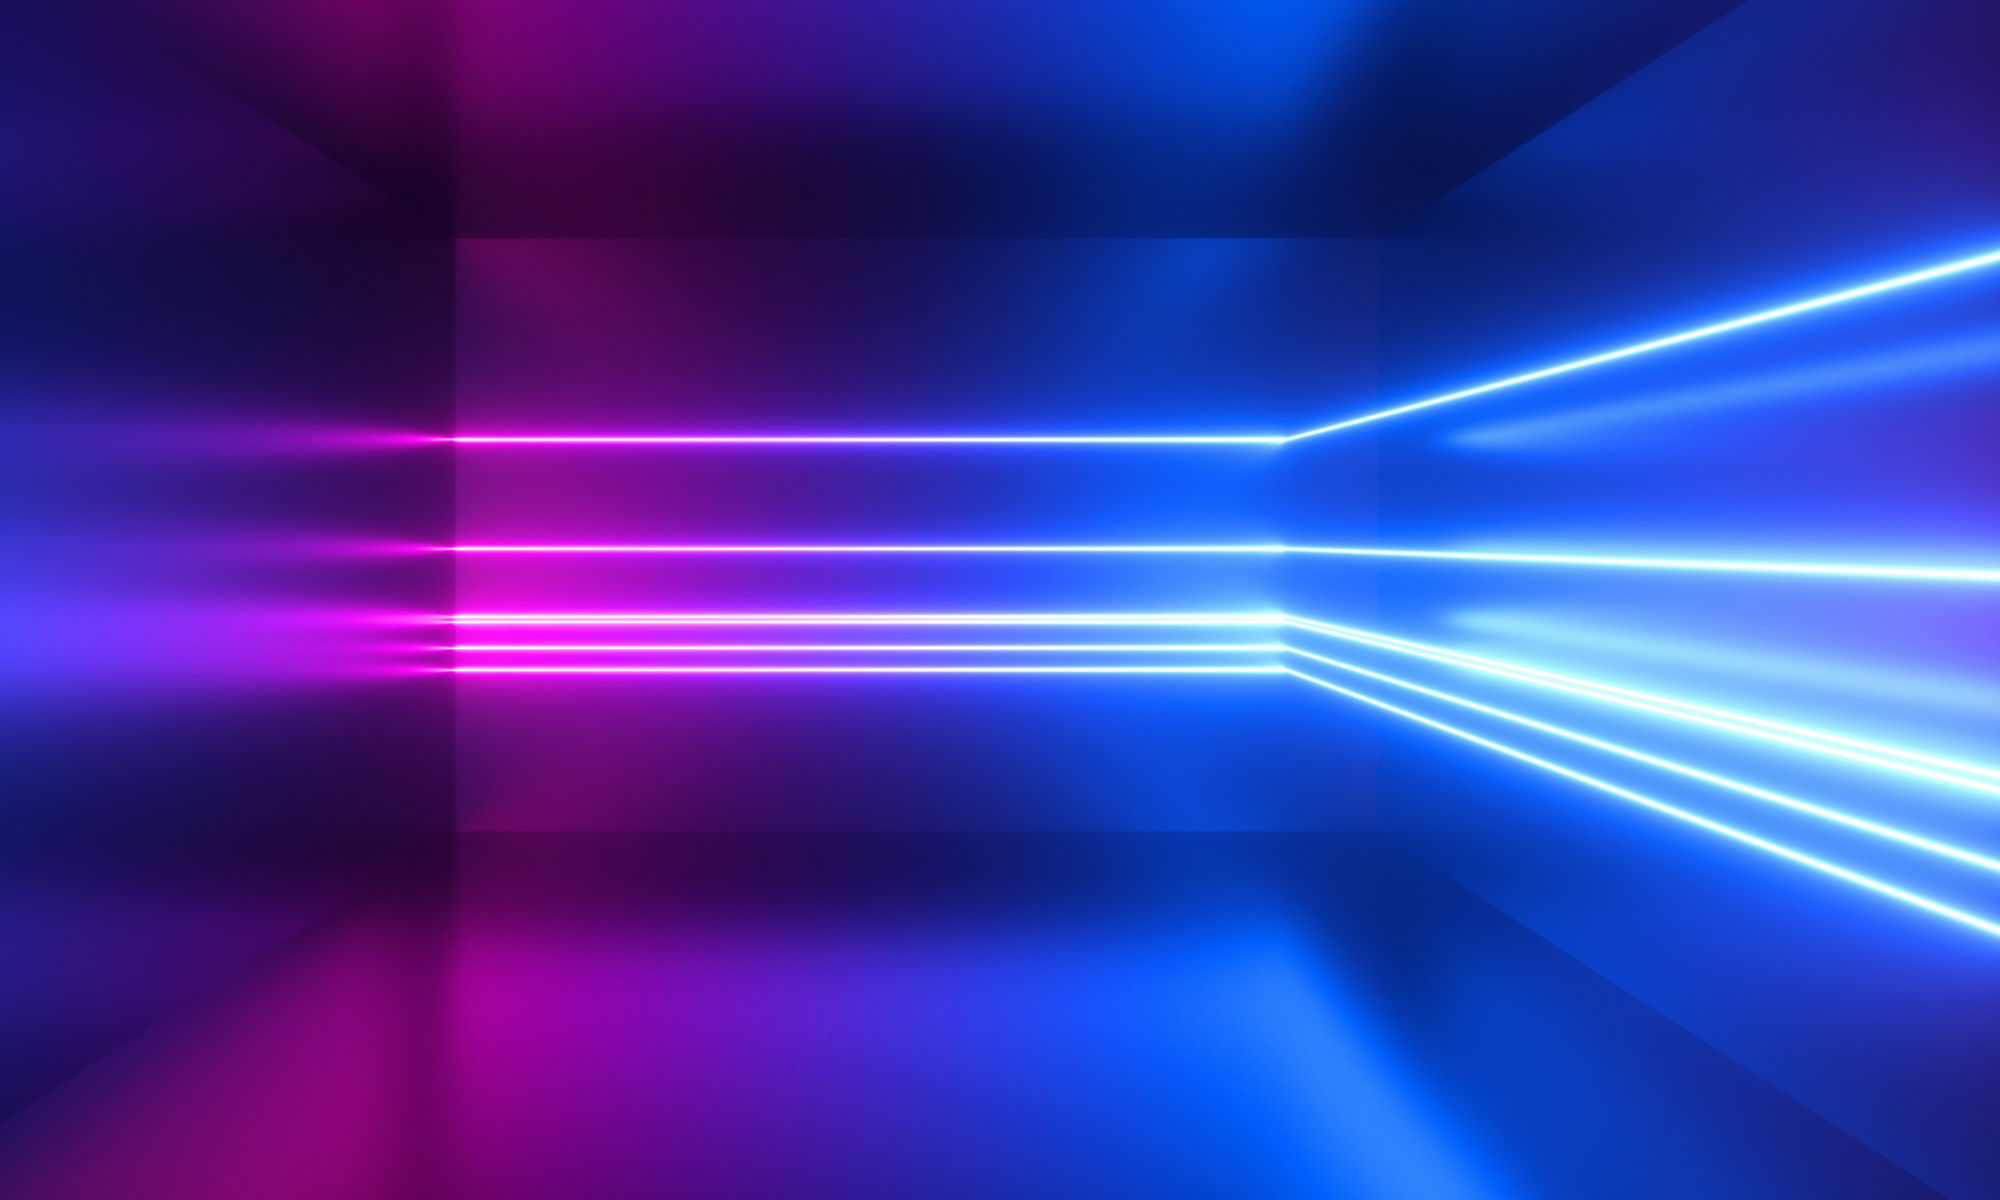 3d render, pink blue neon lines, abstract background, empty room, geometric shapes, virtual space, ultraviolet light, 80's style, retro disco club, fashion laser show